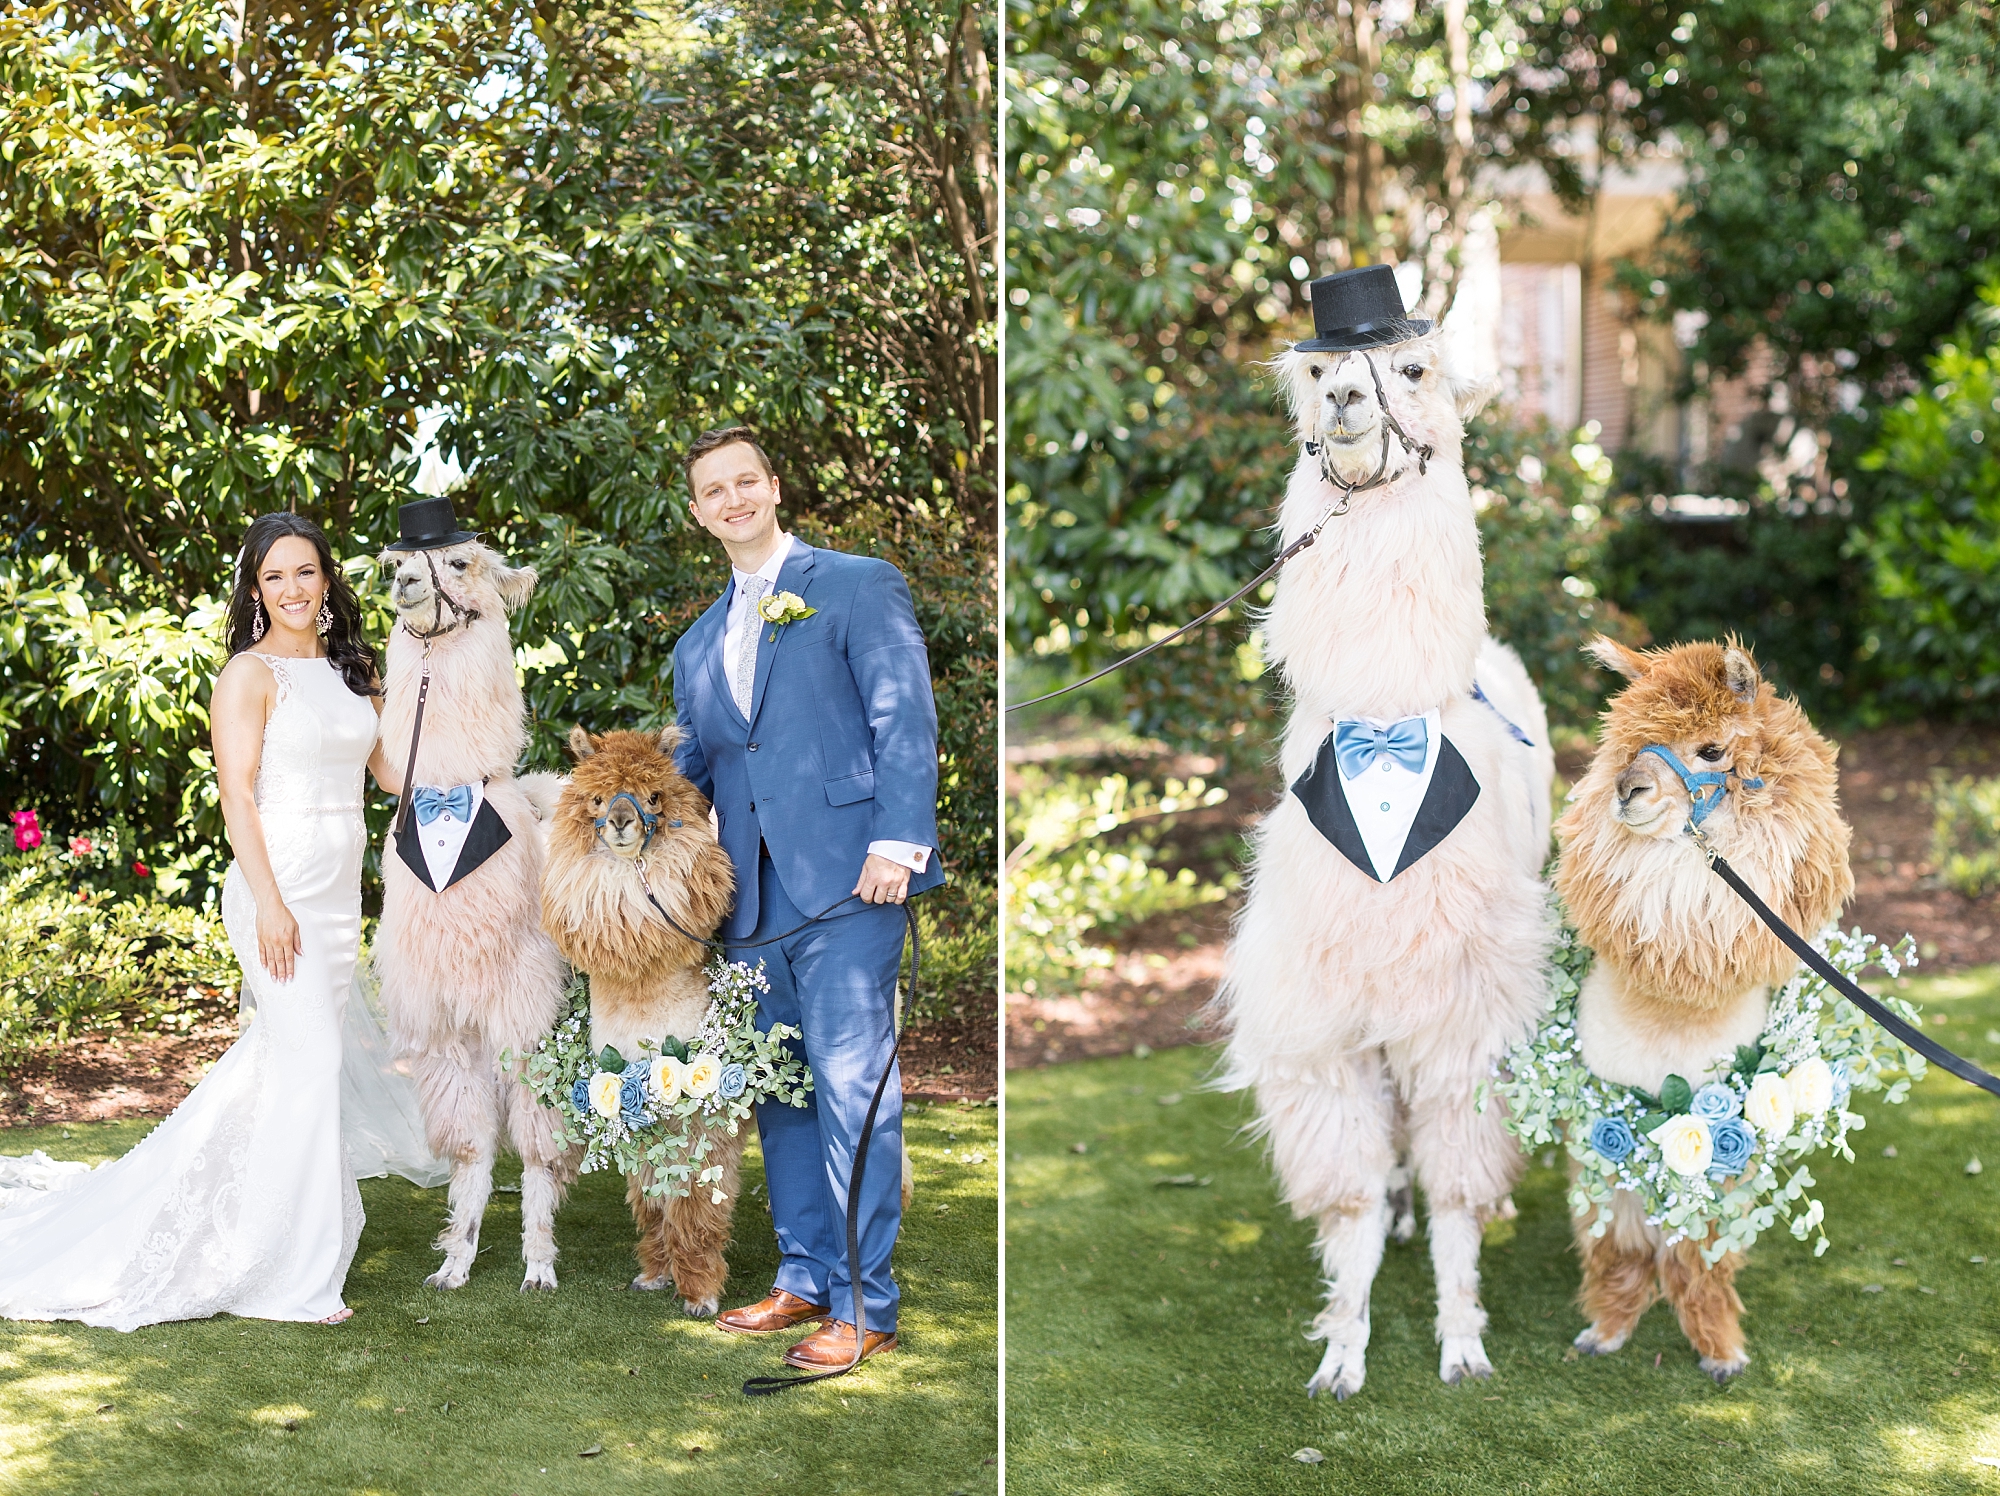 Bride and groom with dressed up alpacas | Raleigh NC Wedding Photographer